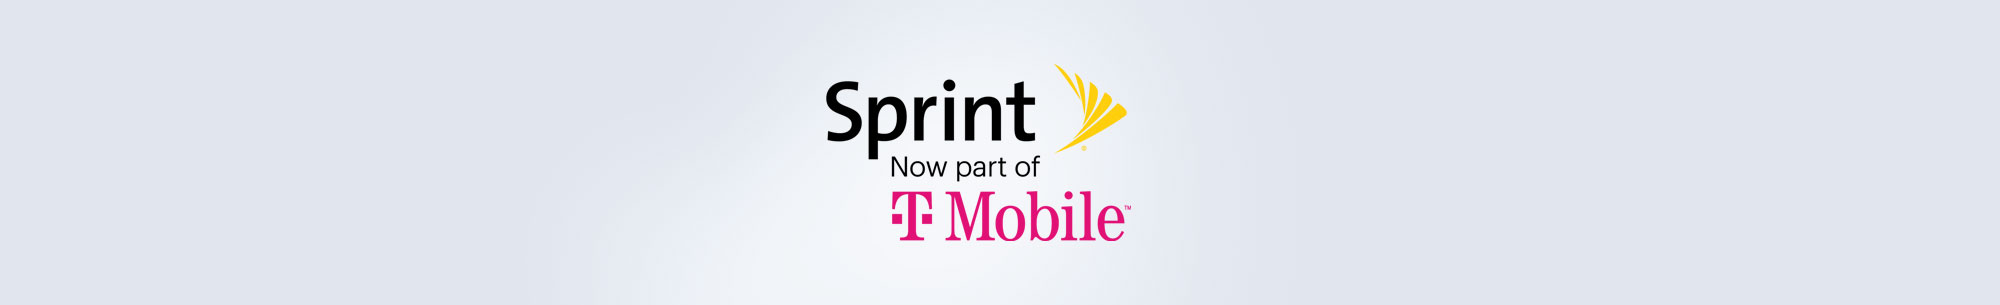 Sprint now part of T mobile